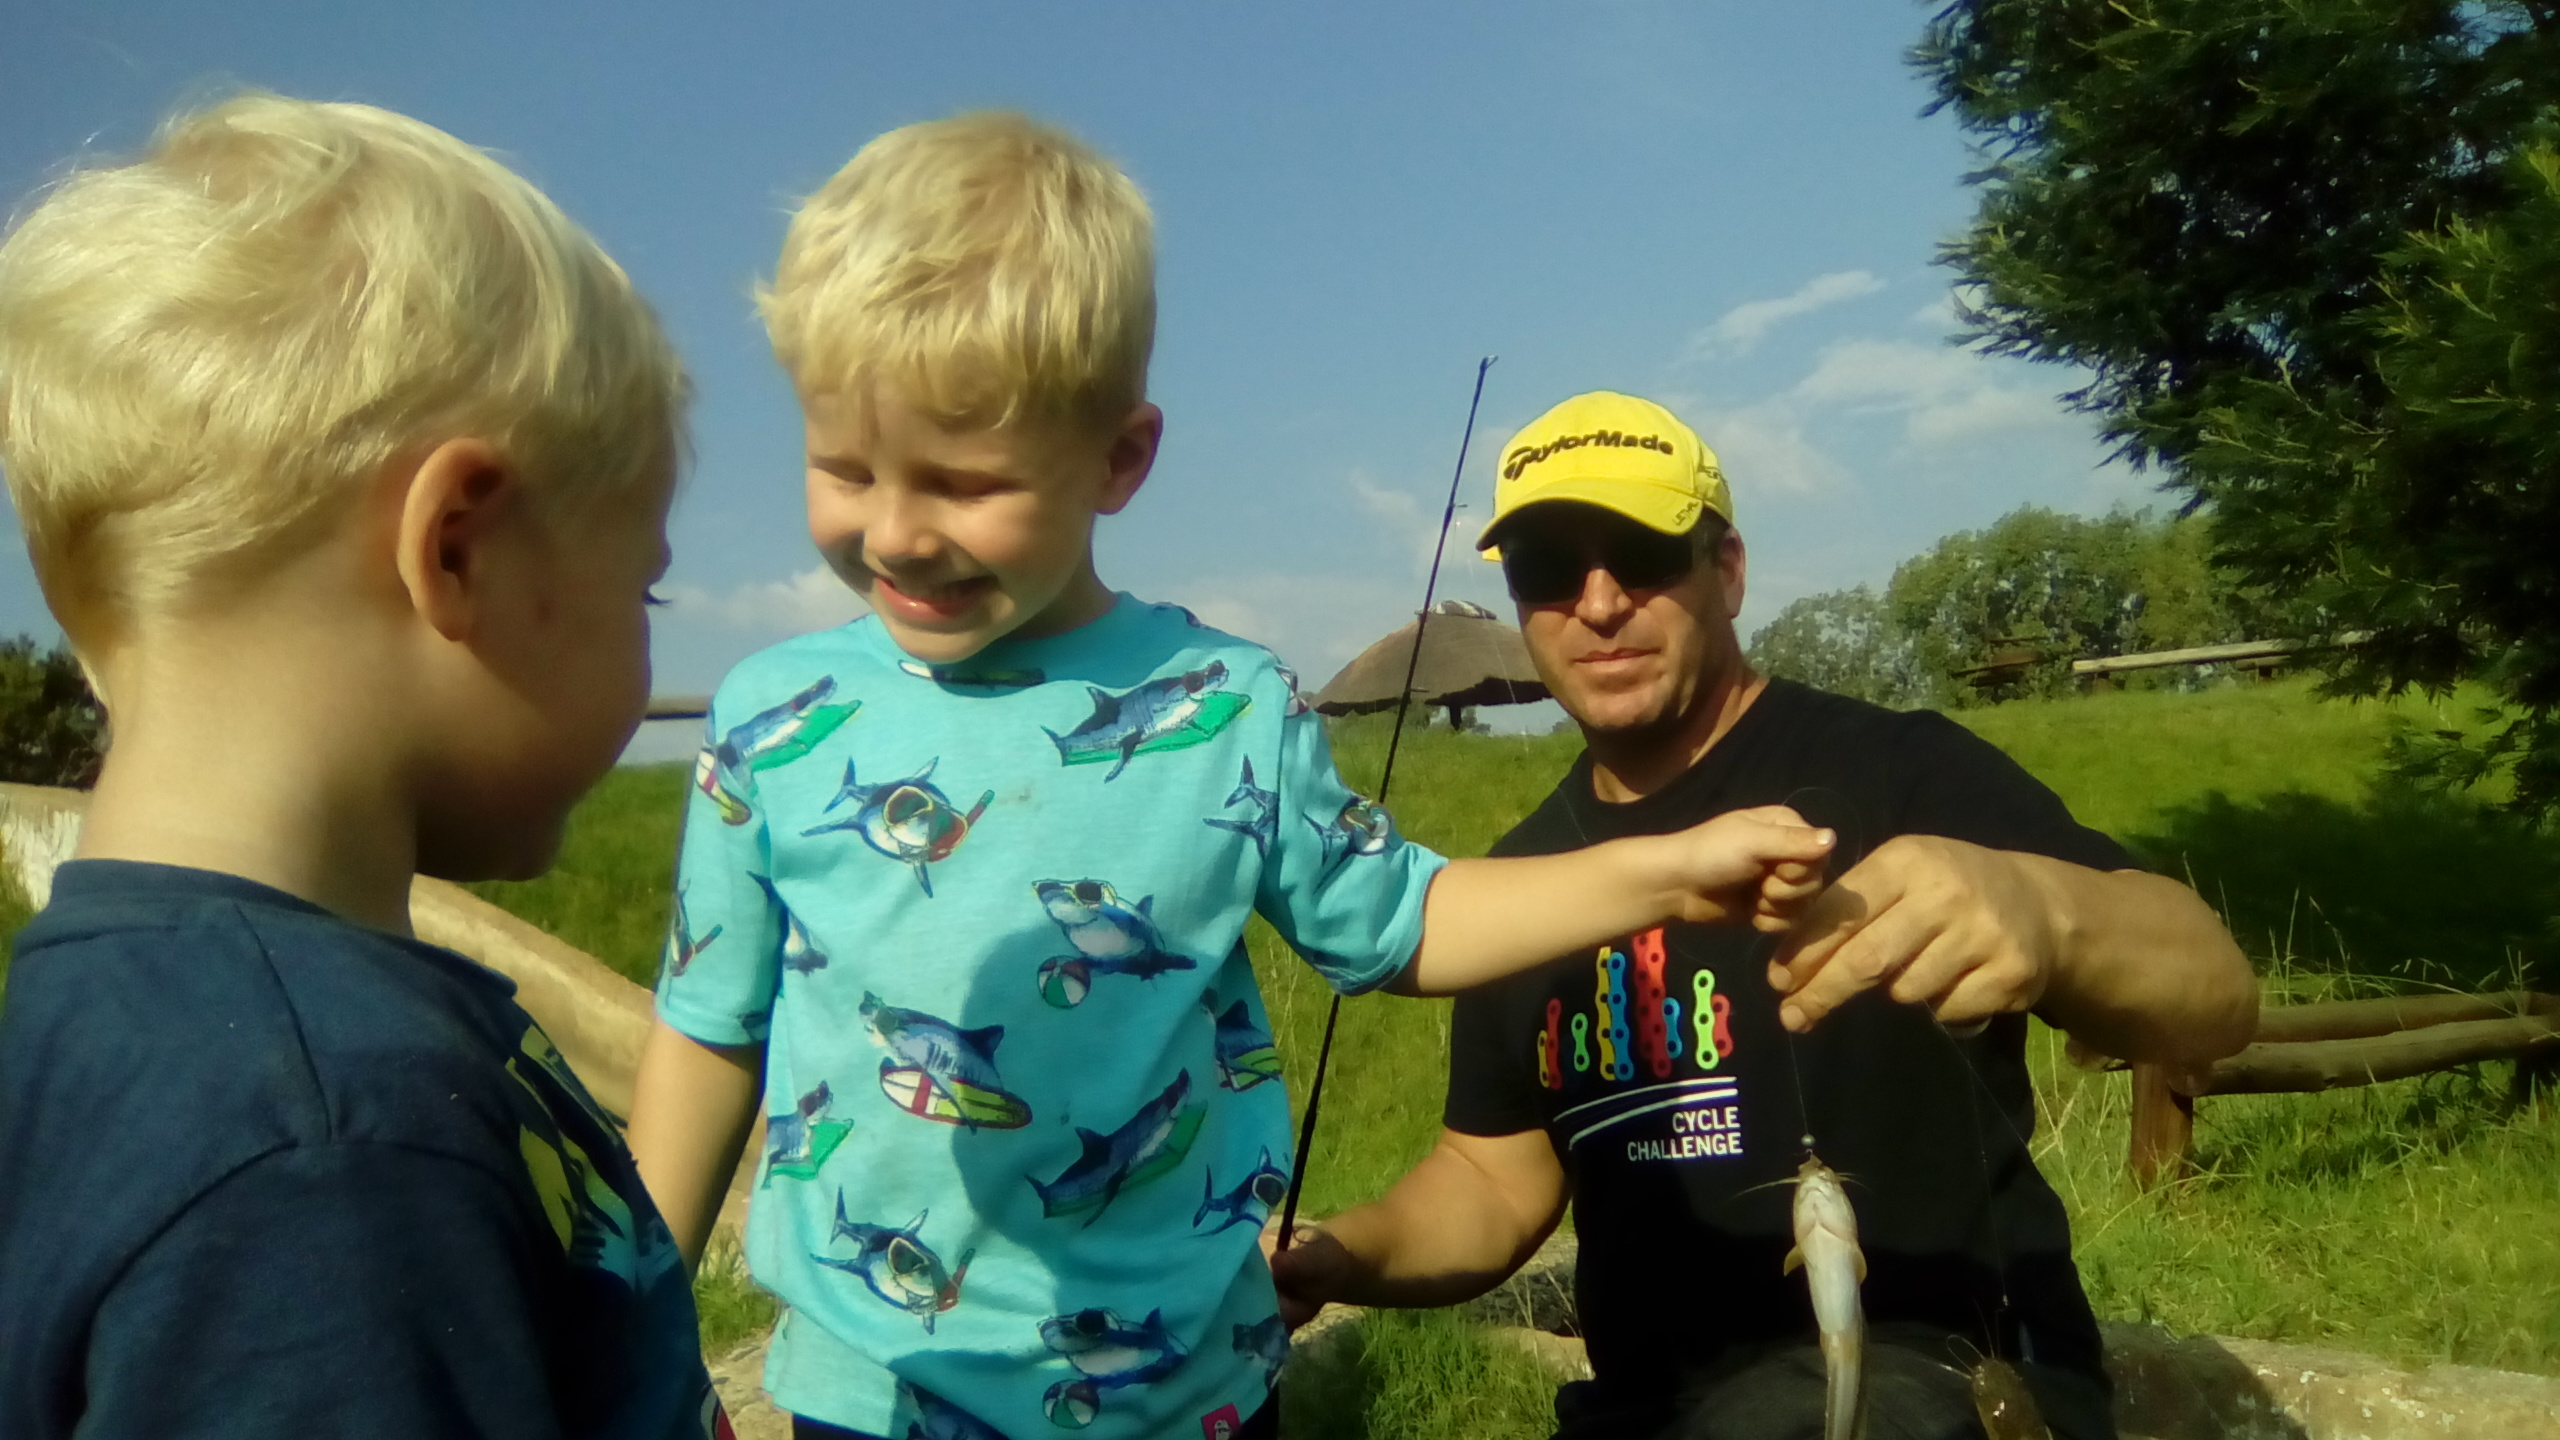 Fishing lessons from the kids at Footloose Trout Farm